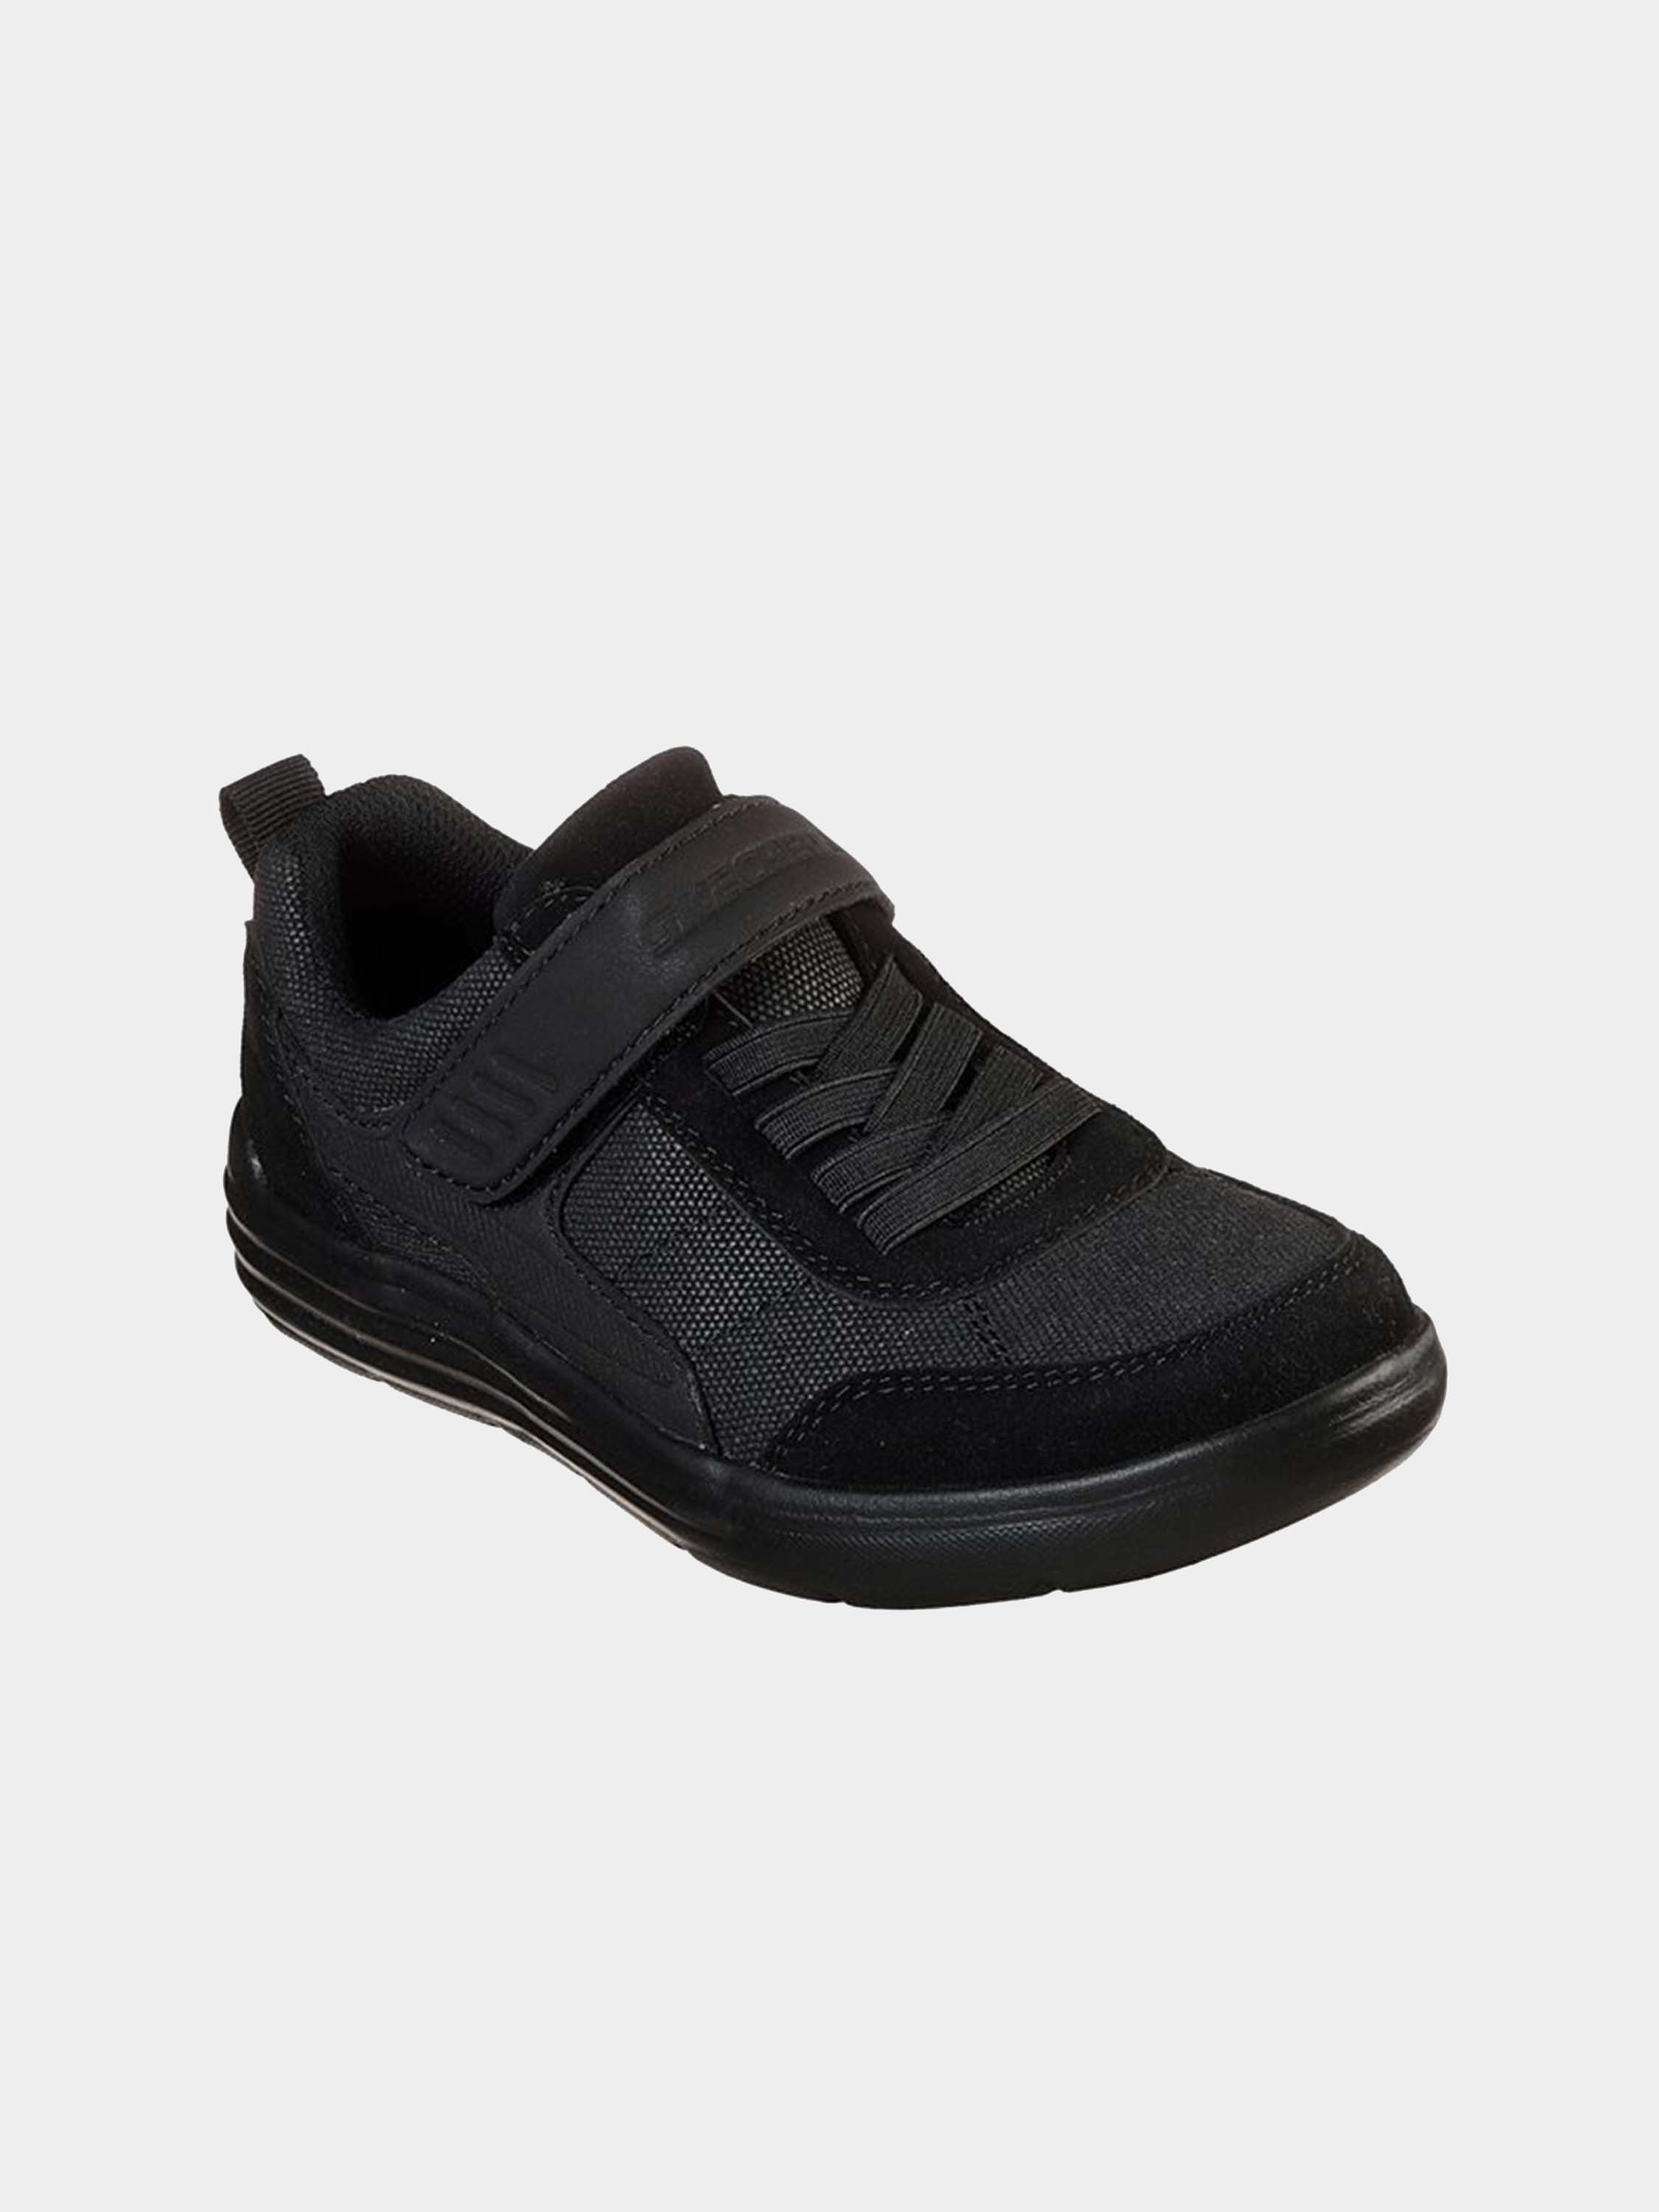 Skechers Boys Maddox - Street Shifter Shoes #color_Black